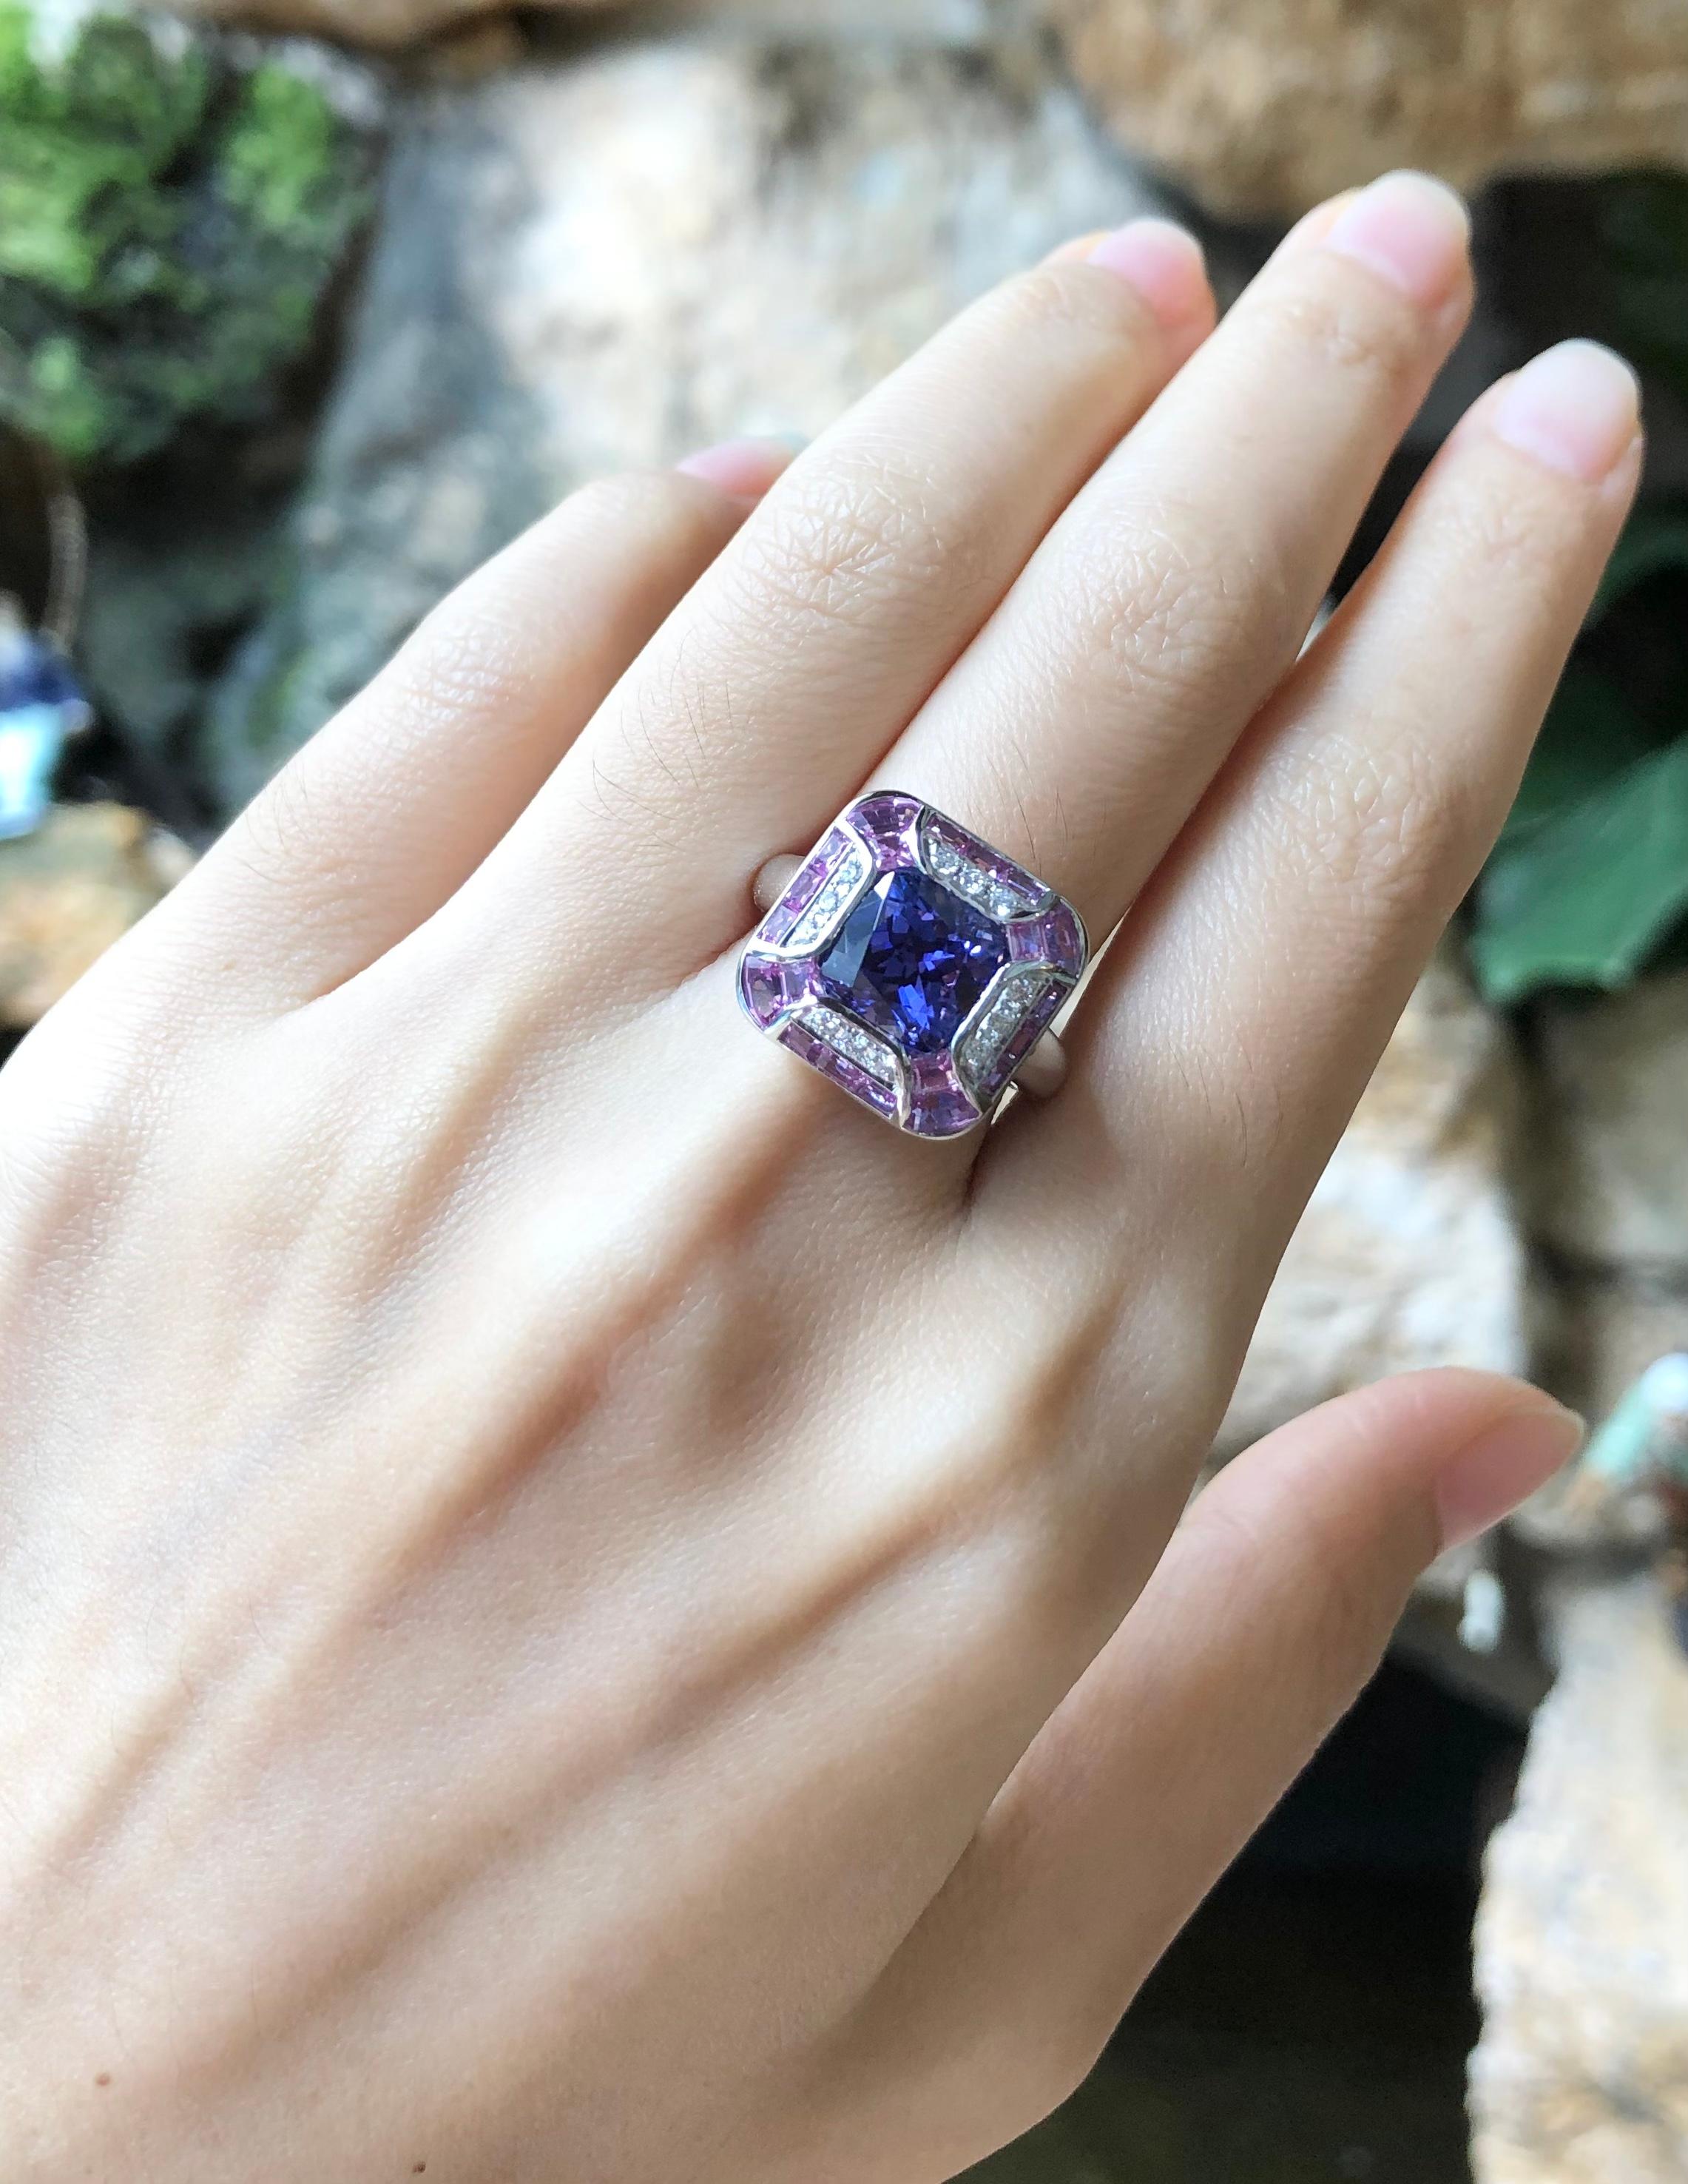 Tanzanite 3.36 carats with Pink sapphire 2.61 carats and Diamond 0.14 carat Ring set in 18 Karat White Gold Settings

Width:  1.6 cm 
Length:  1.6 cm
Ring Size: 53
Total Weight: 10.61 grams

